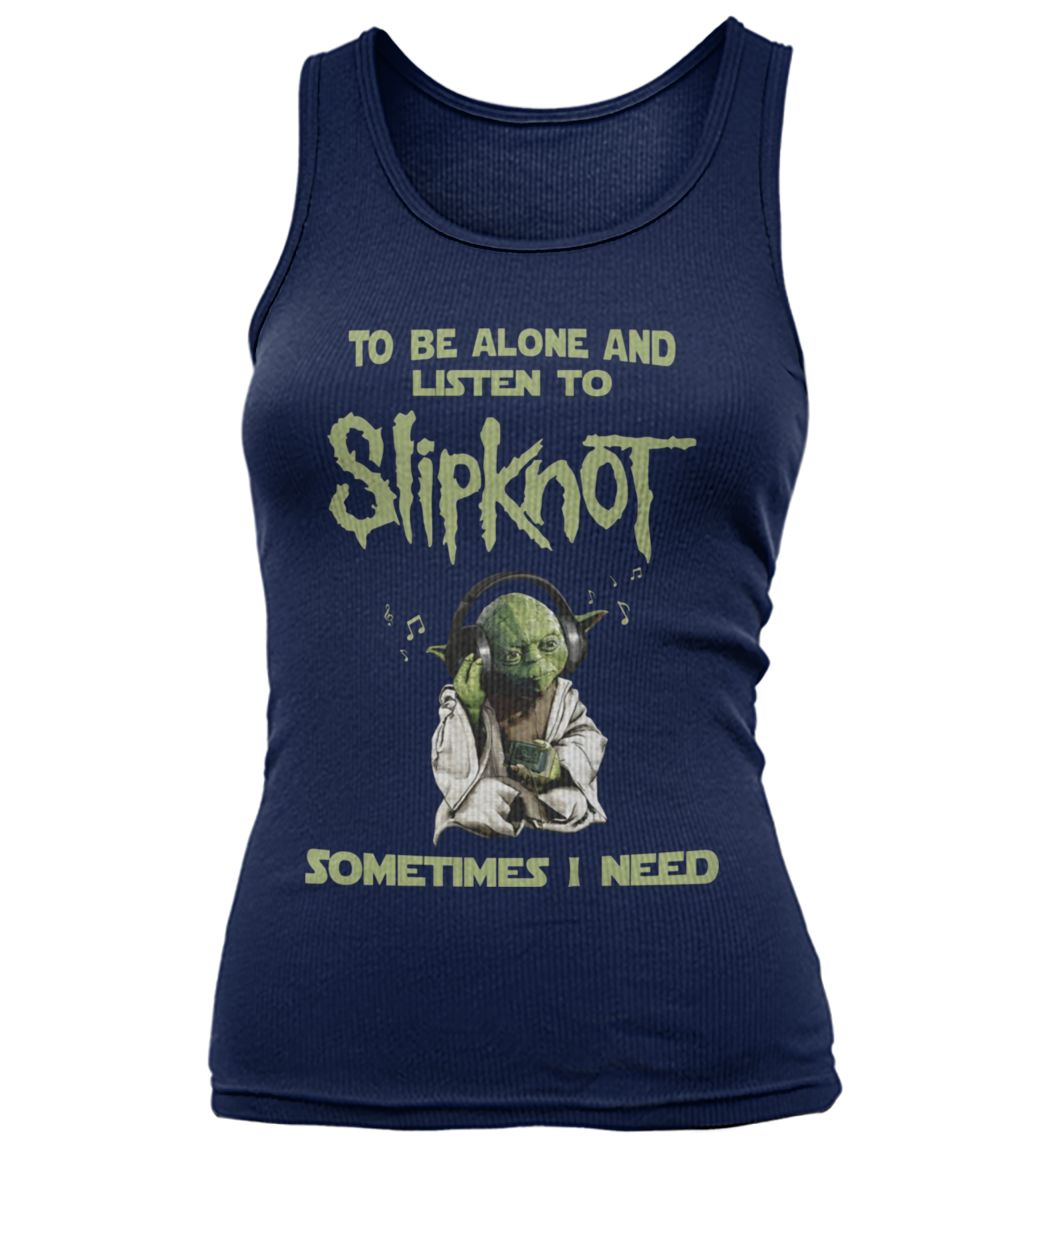 Yoda sometimes I need to be alone and listen to slip-knot women's tank top